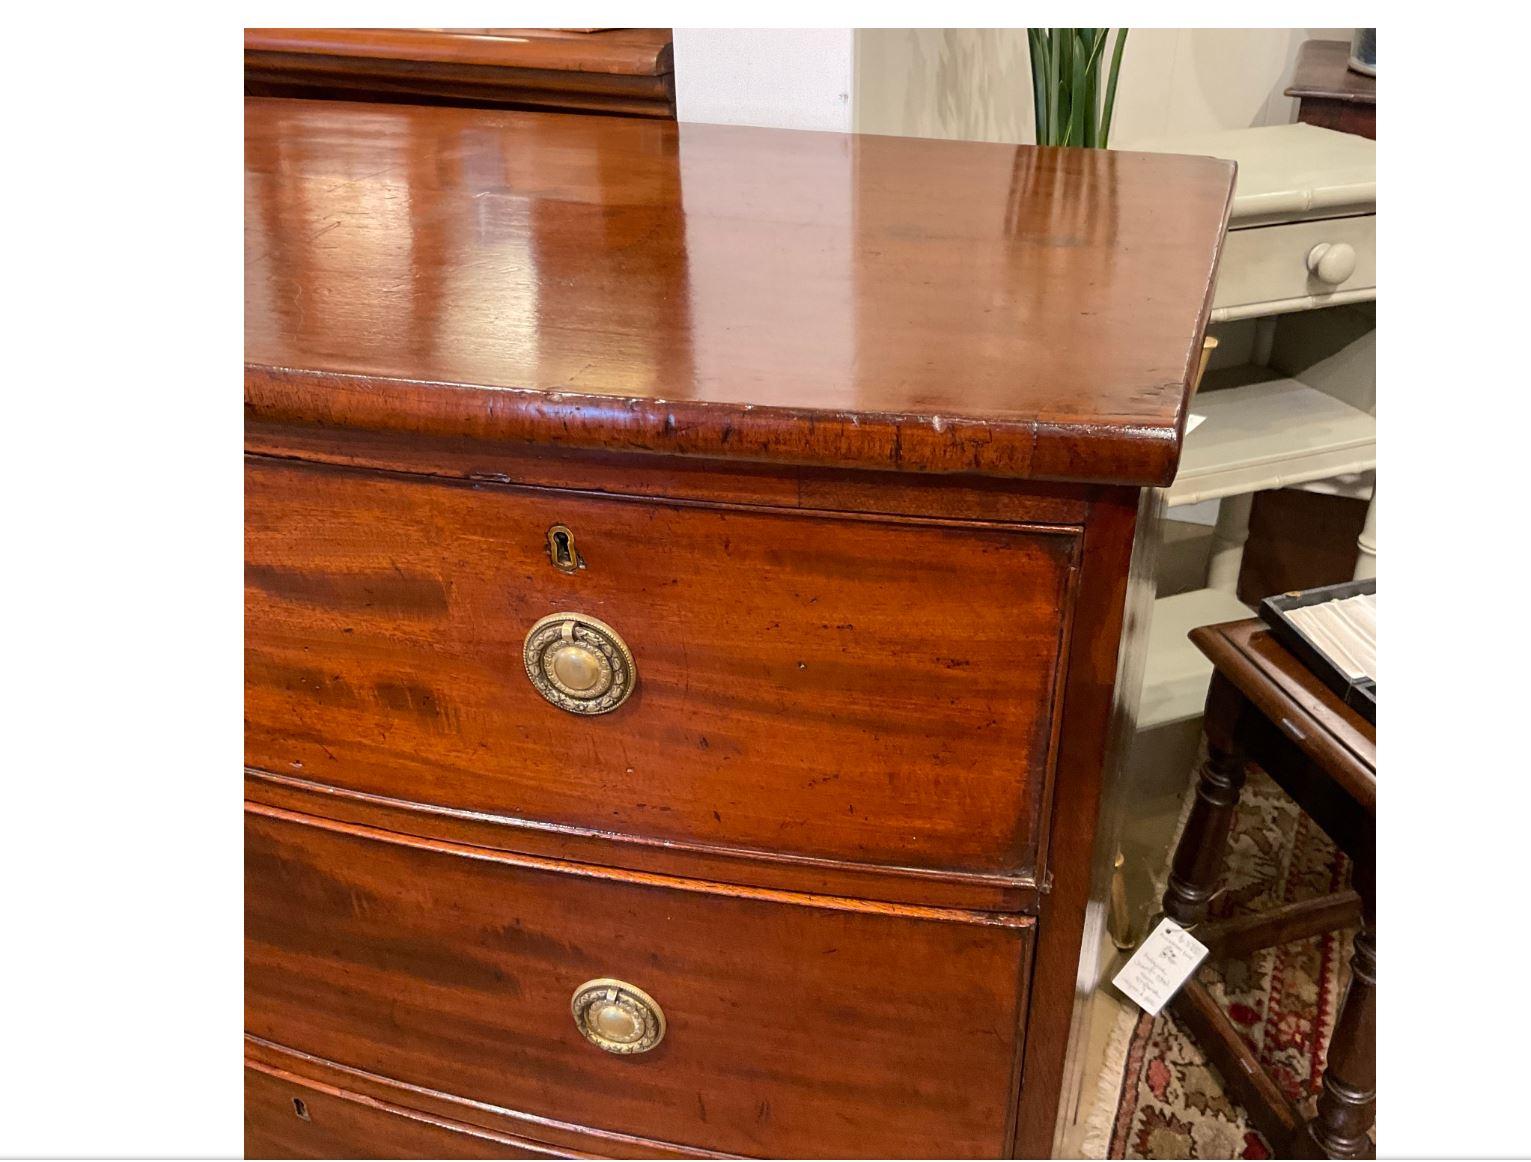 This is a beautiful 19th century English chest! The walnut wood is glossy and has nice natural design. This piece is two over two with a bowfront that is accented with brass pulls with delicate hand carved detailing. This chest is a great